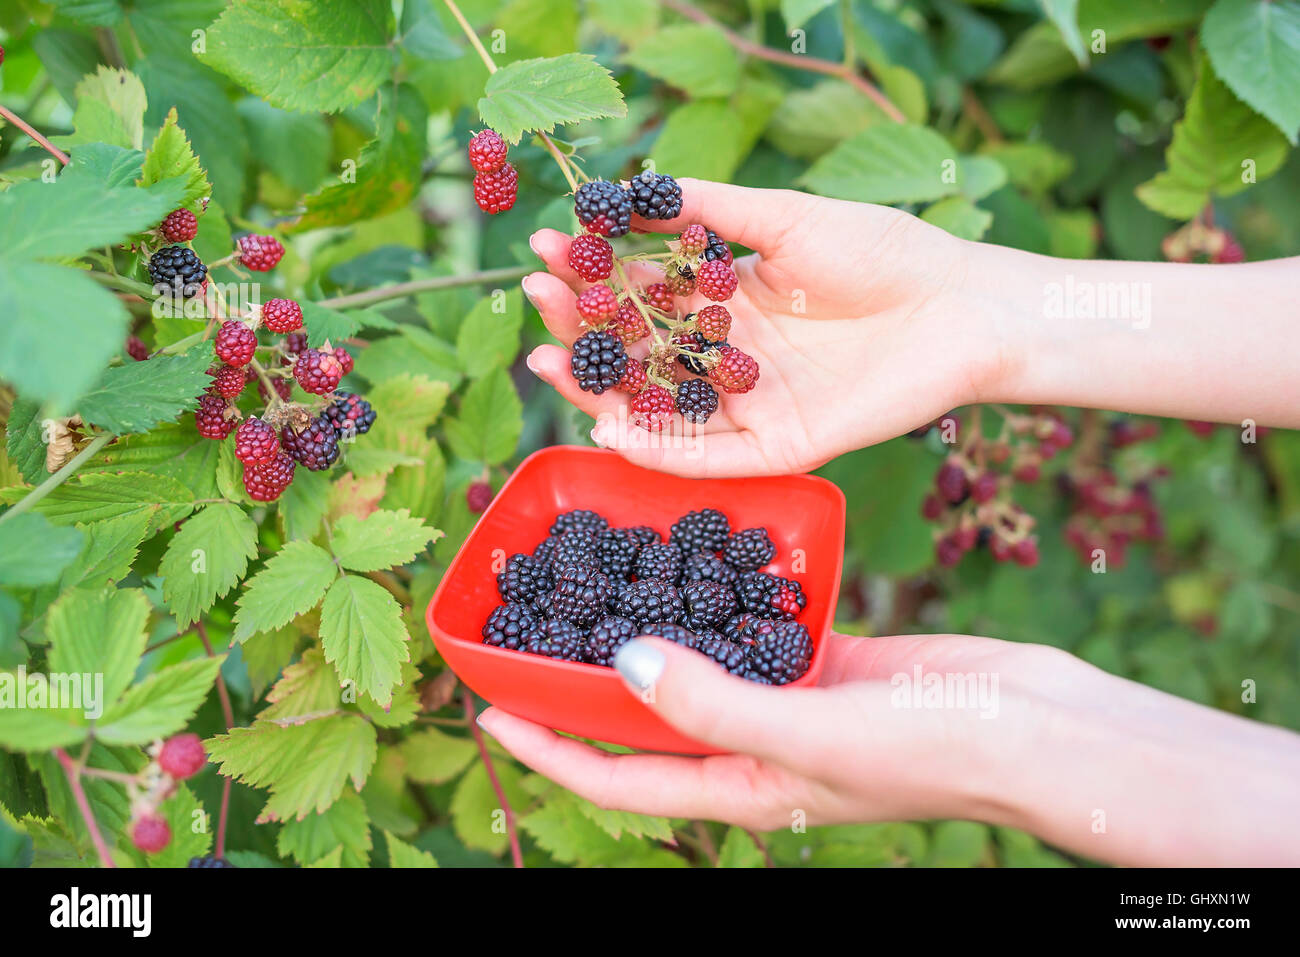 Female hand harvested blackberry into a bowl. Stock Photo